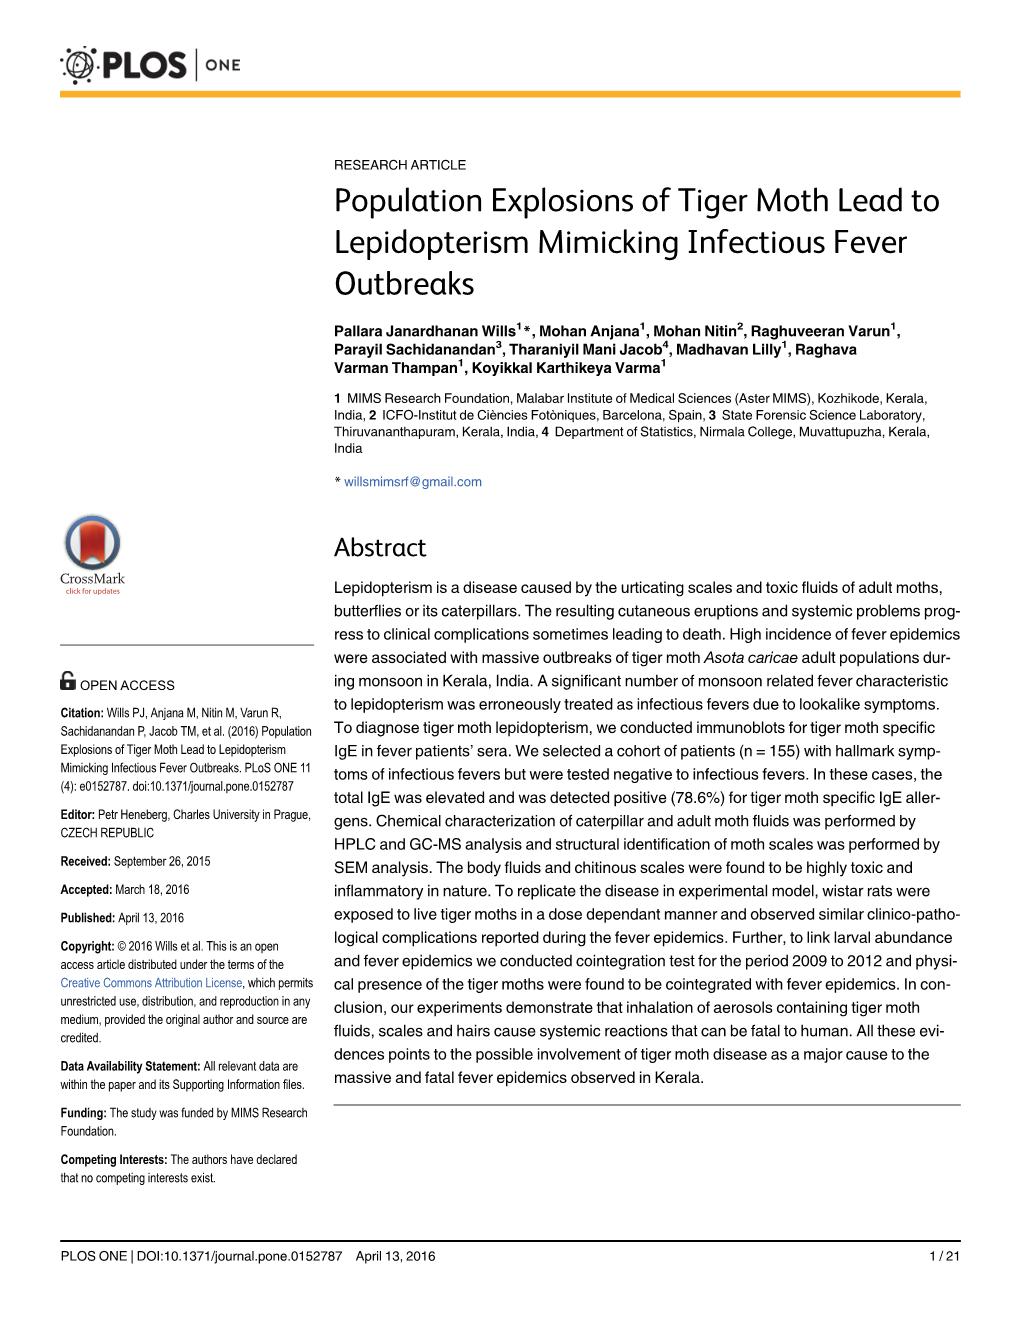 Population Explosions of Tiger Moth Lead to Lepidopterism Mimicking Infectious Fever Outbreaks